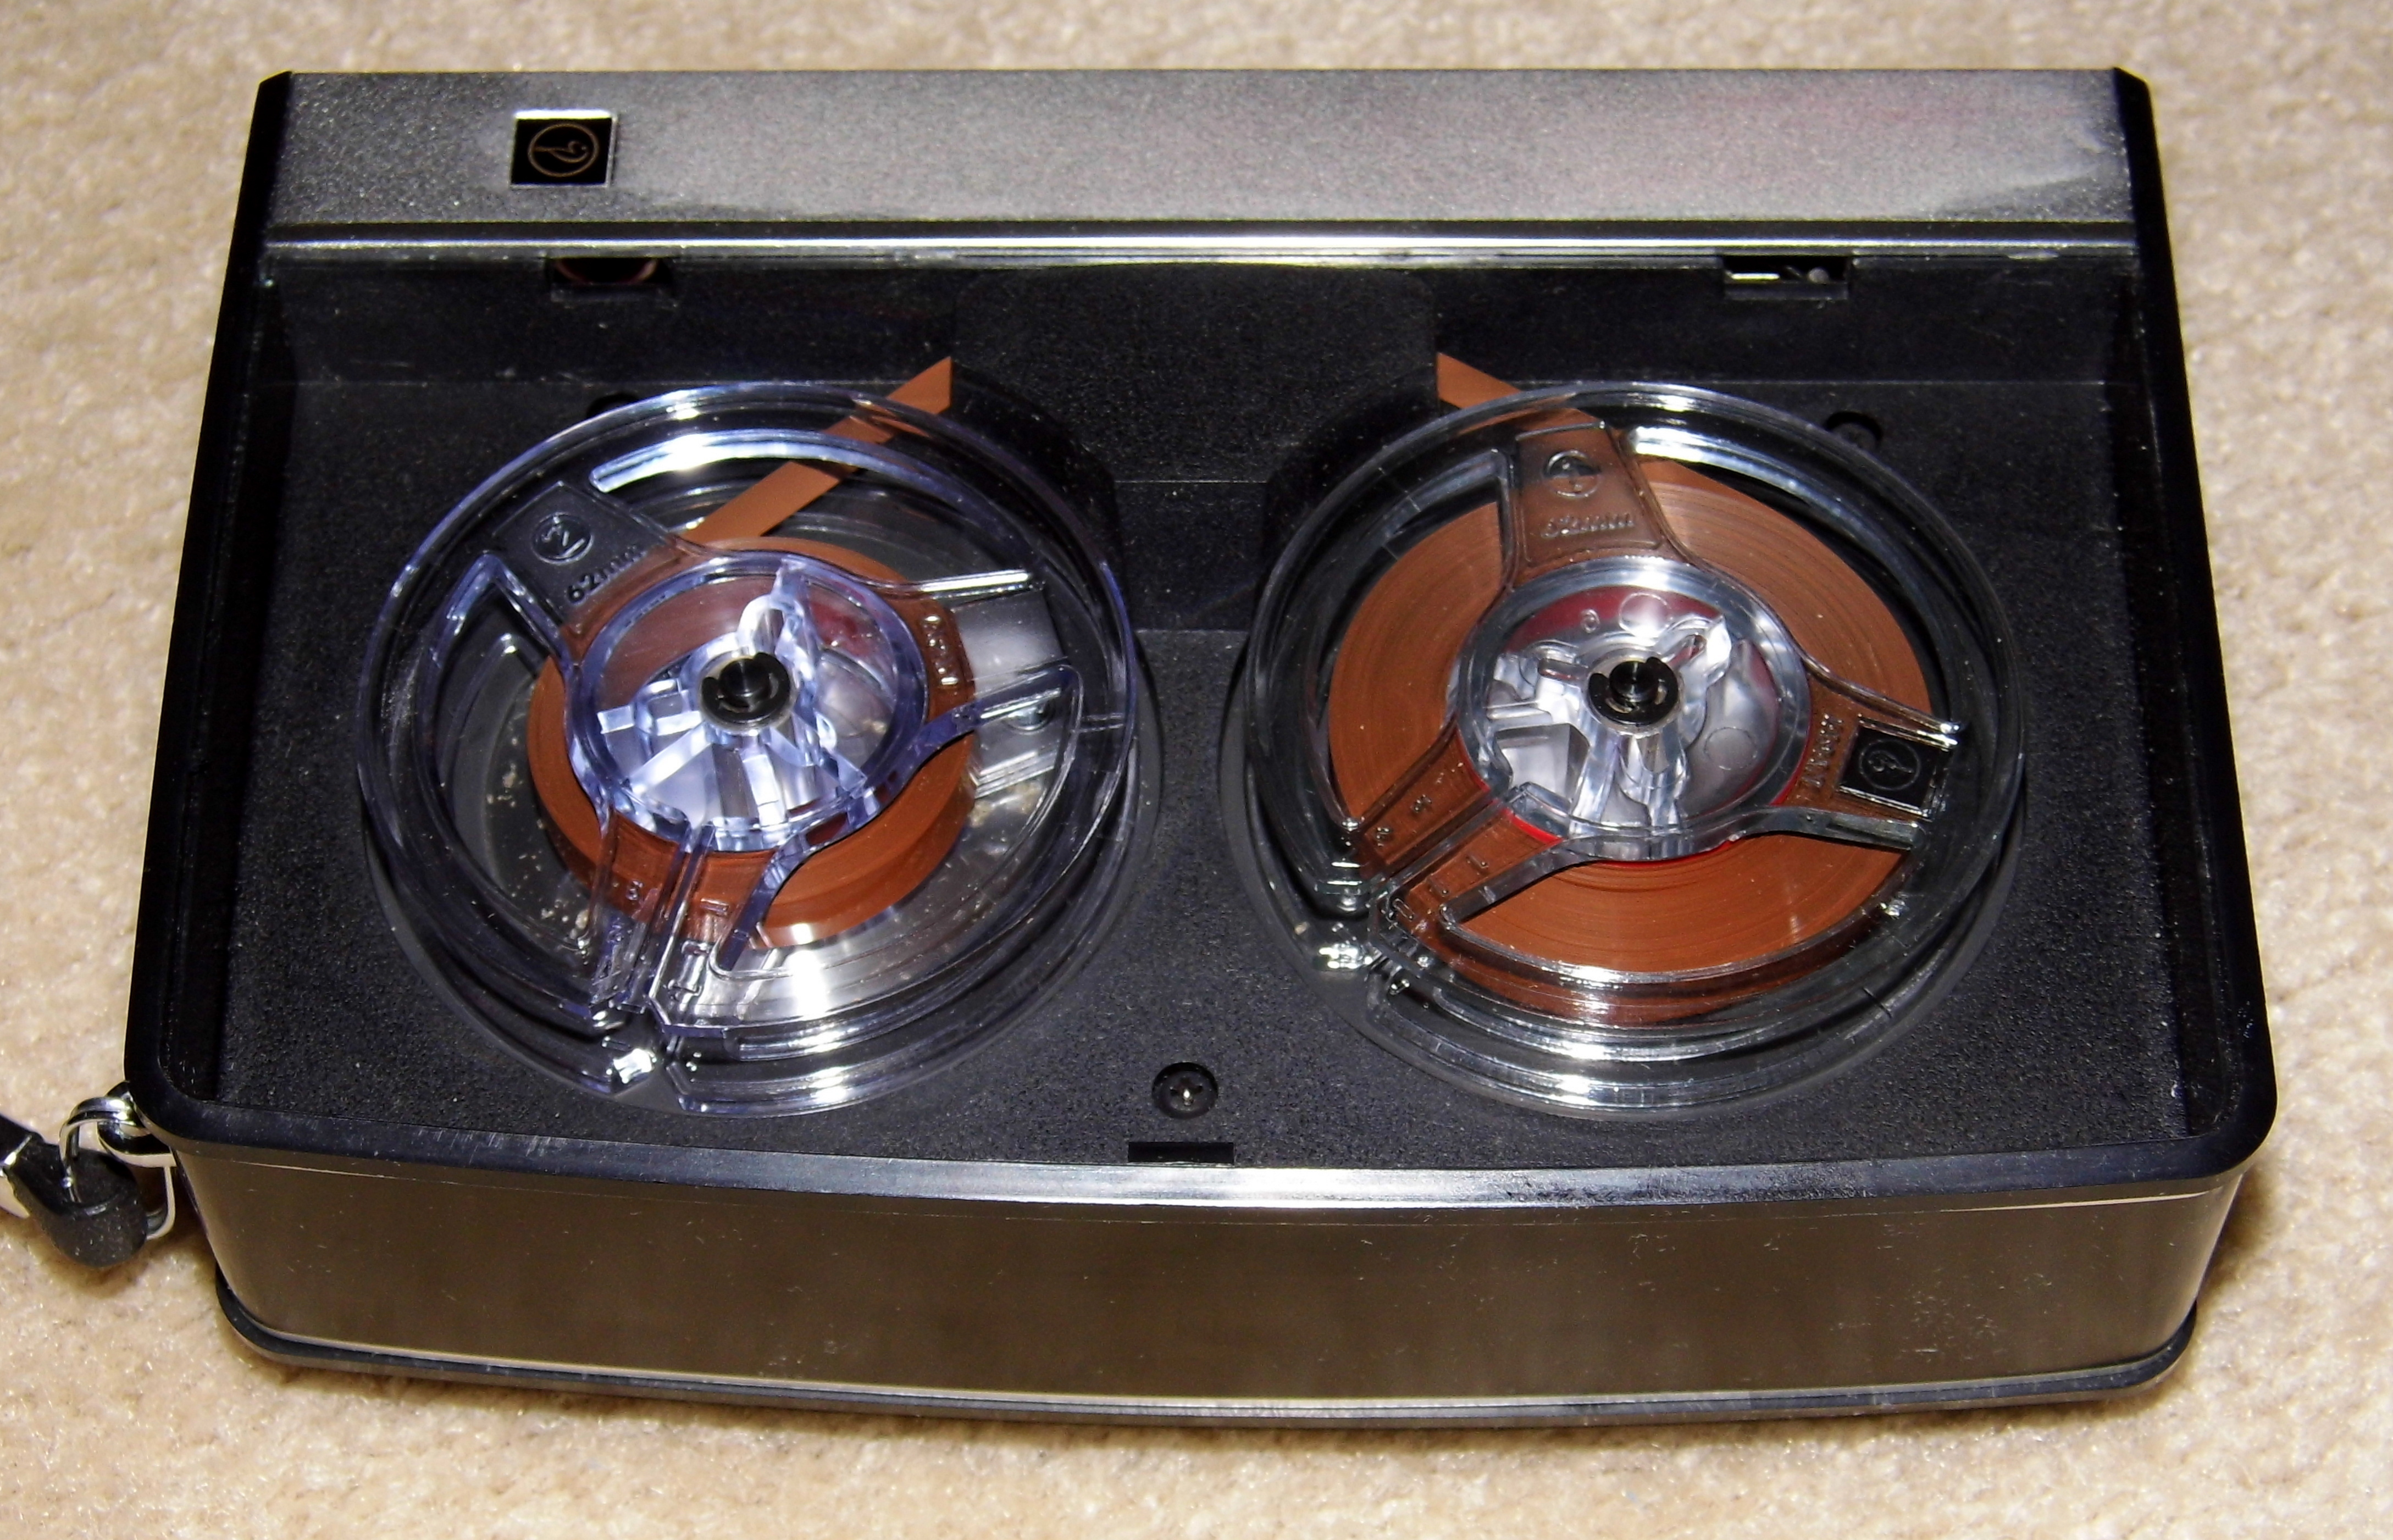 File:Vintage Concord Sound Camera Reel-To-Reel Tape Recorder, Model F-20,  Made In Japan (14185093485).jpg - Wikimedia Commons